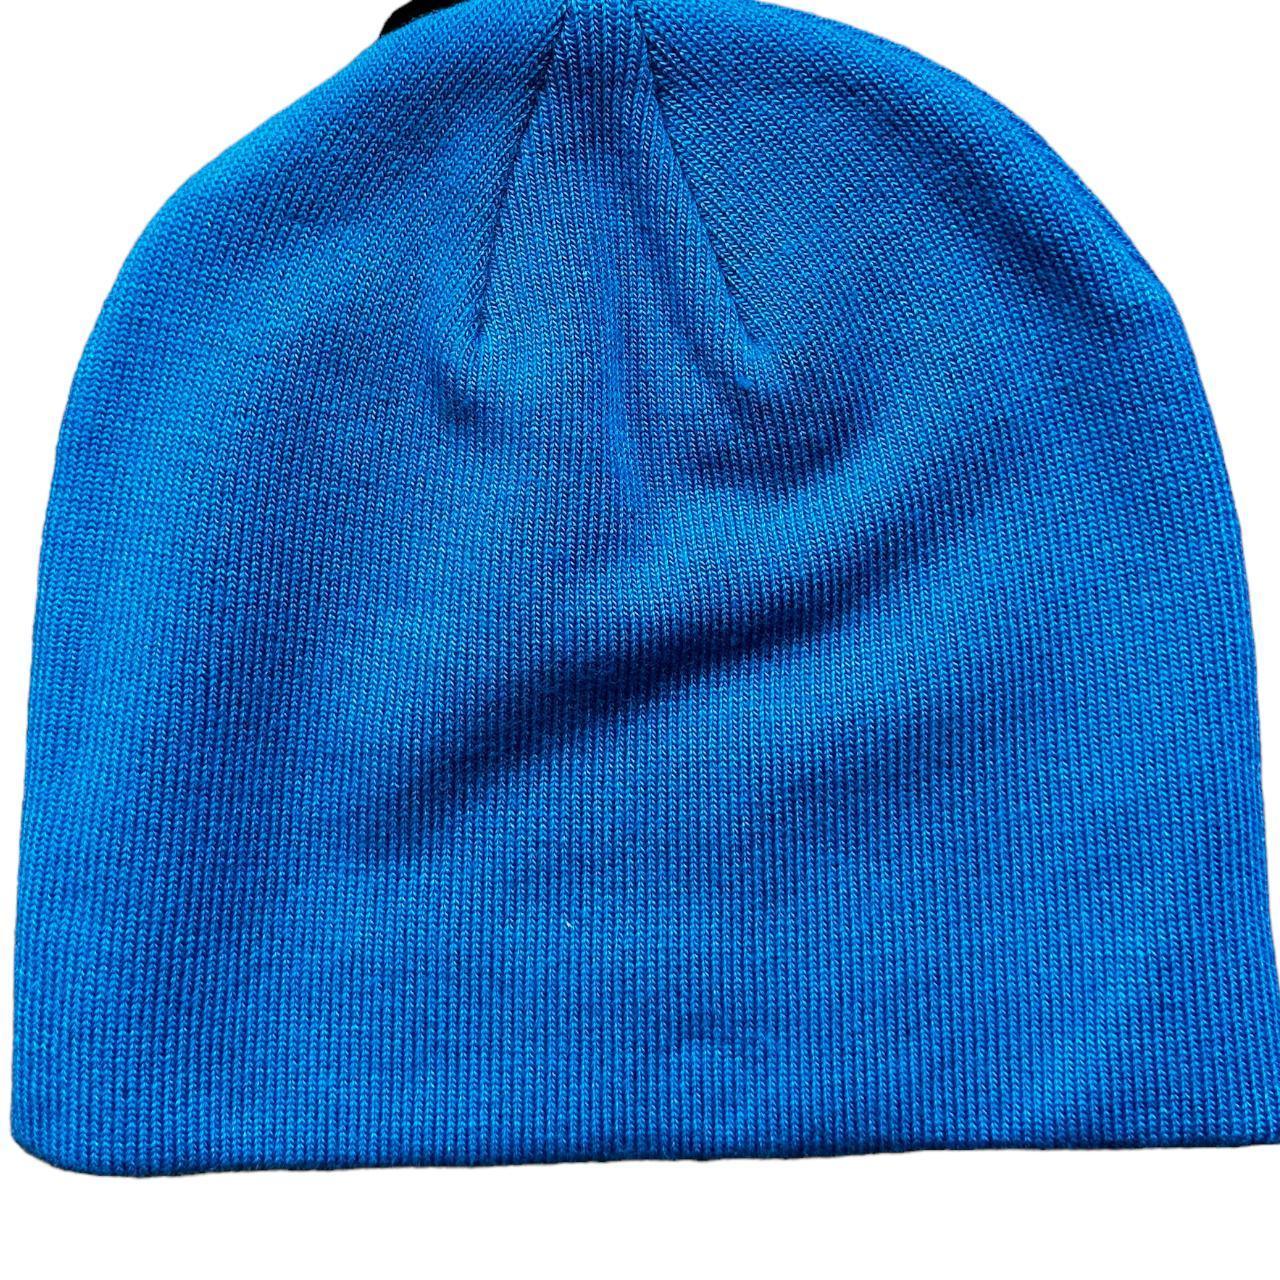 Oakley Blue and White ROCK SIDE BEANIE - Known Source